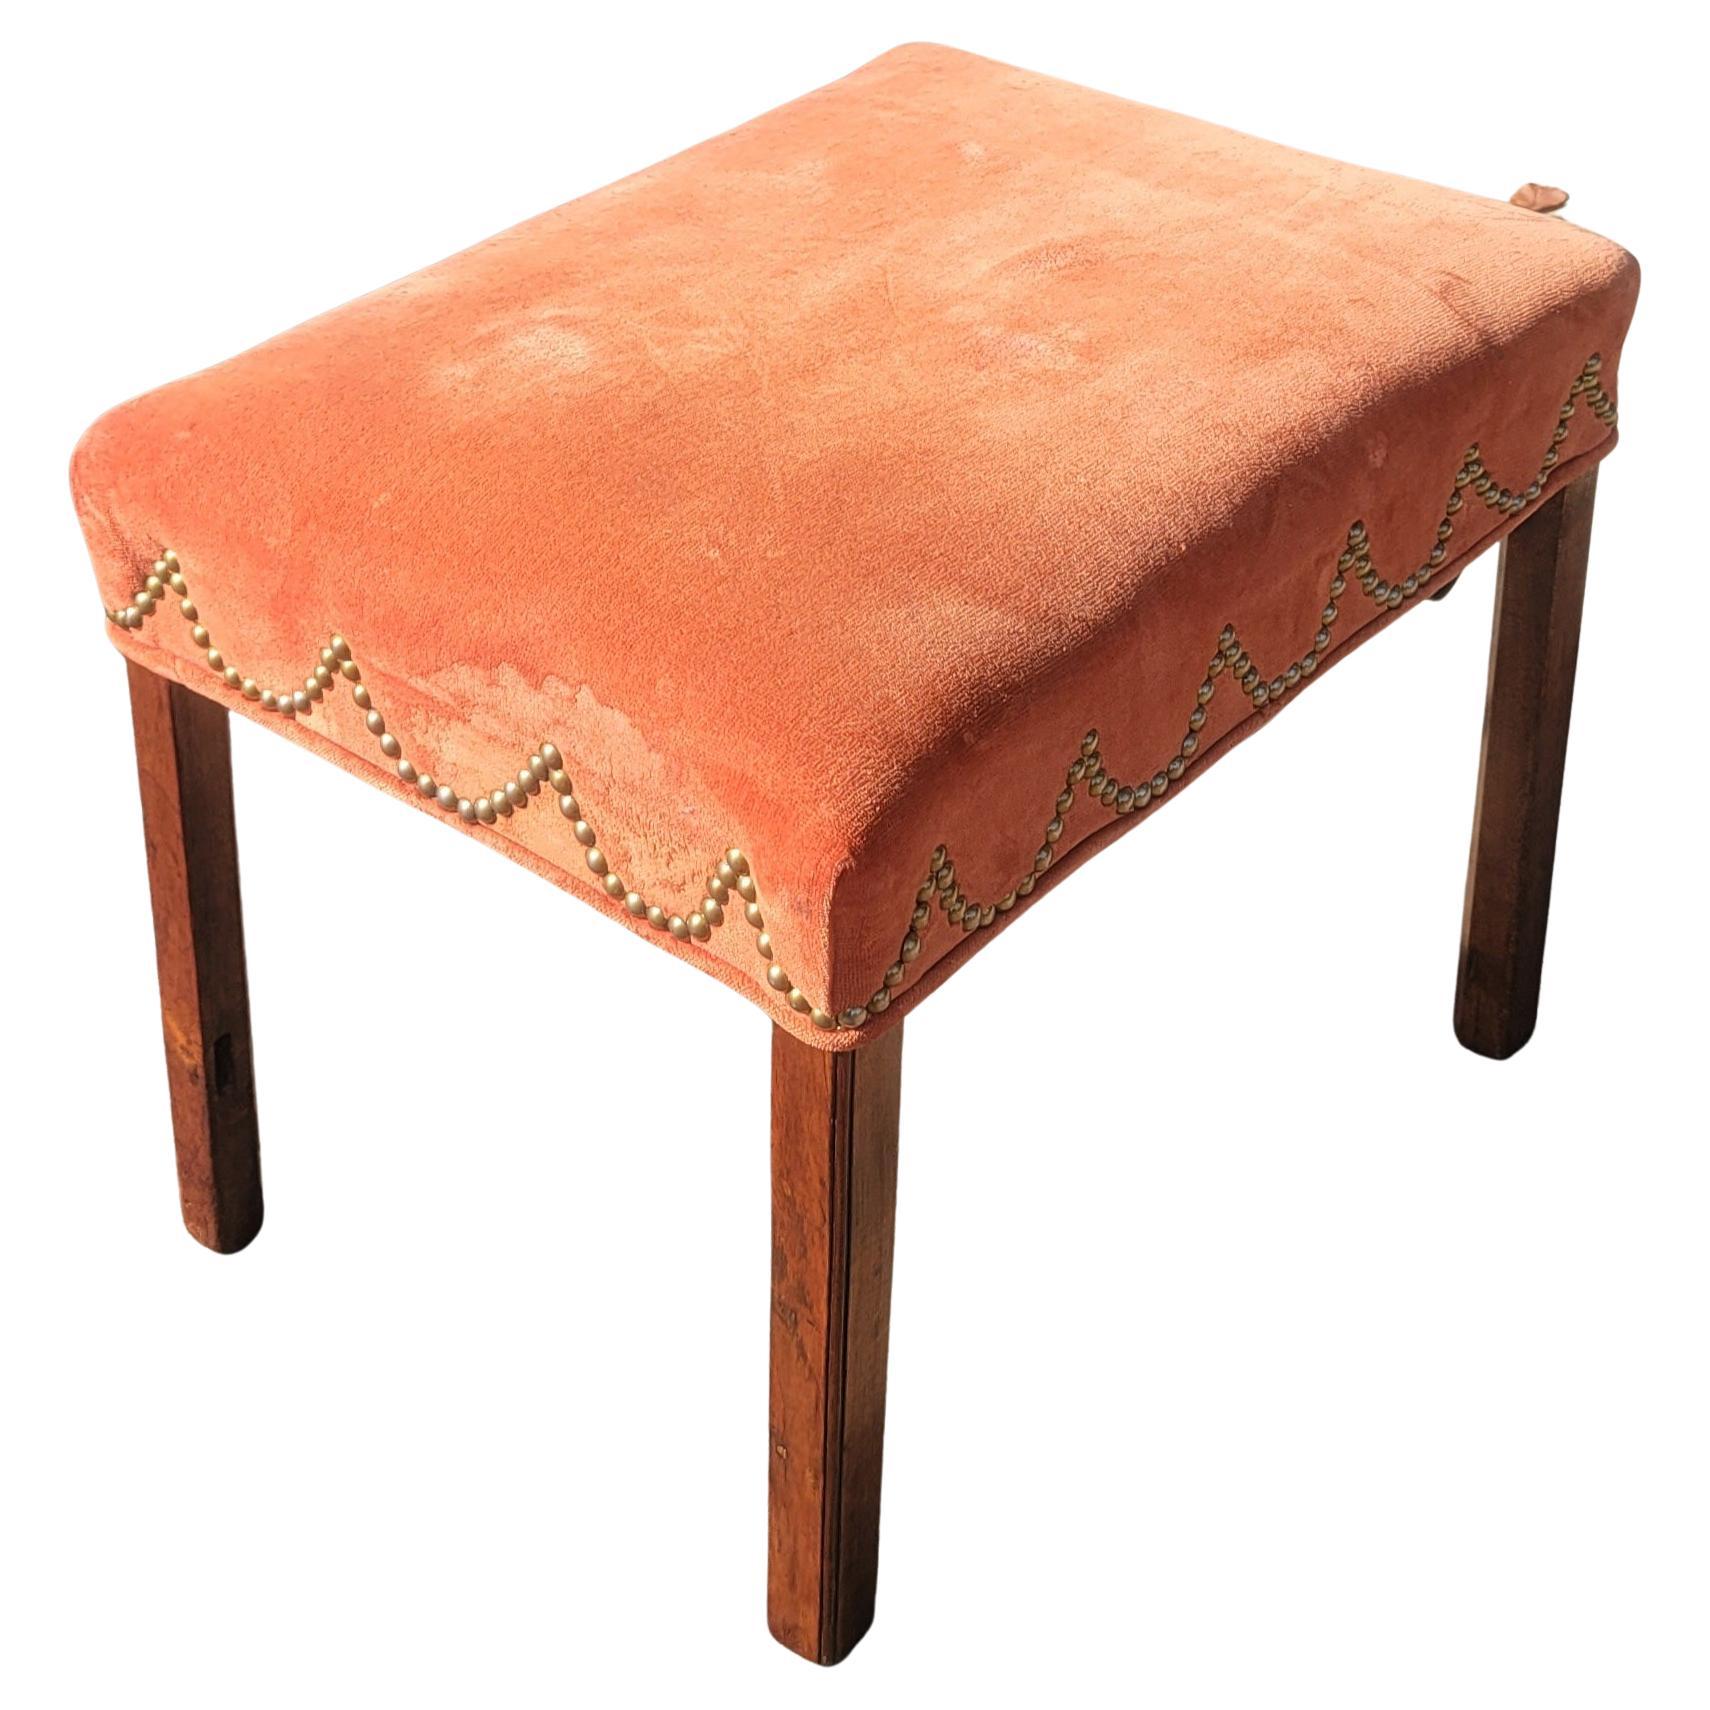 20th Century Early 20th C. Mahogany and Velvet Upholstered Stool with Nailhead Trims For Sale